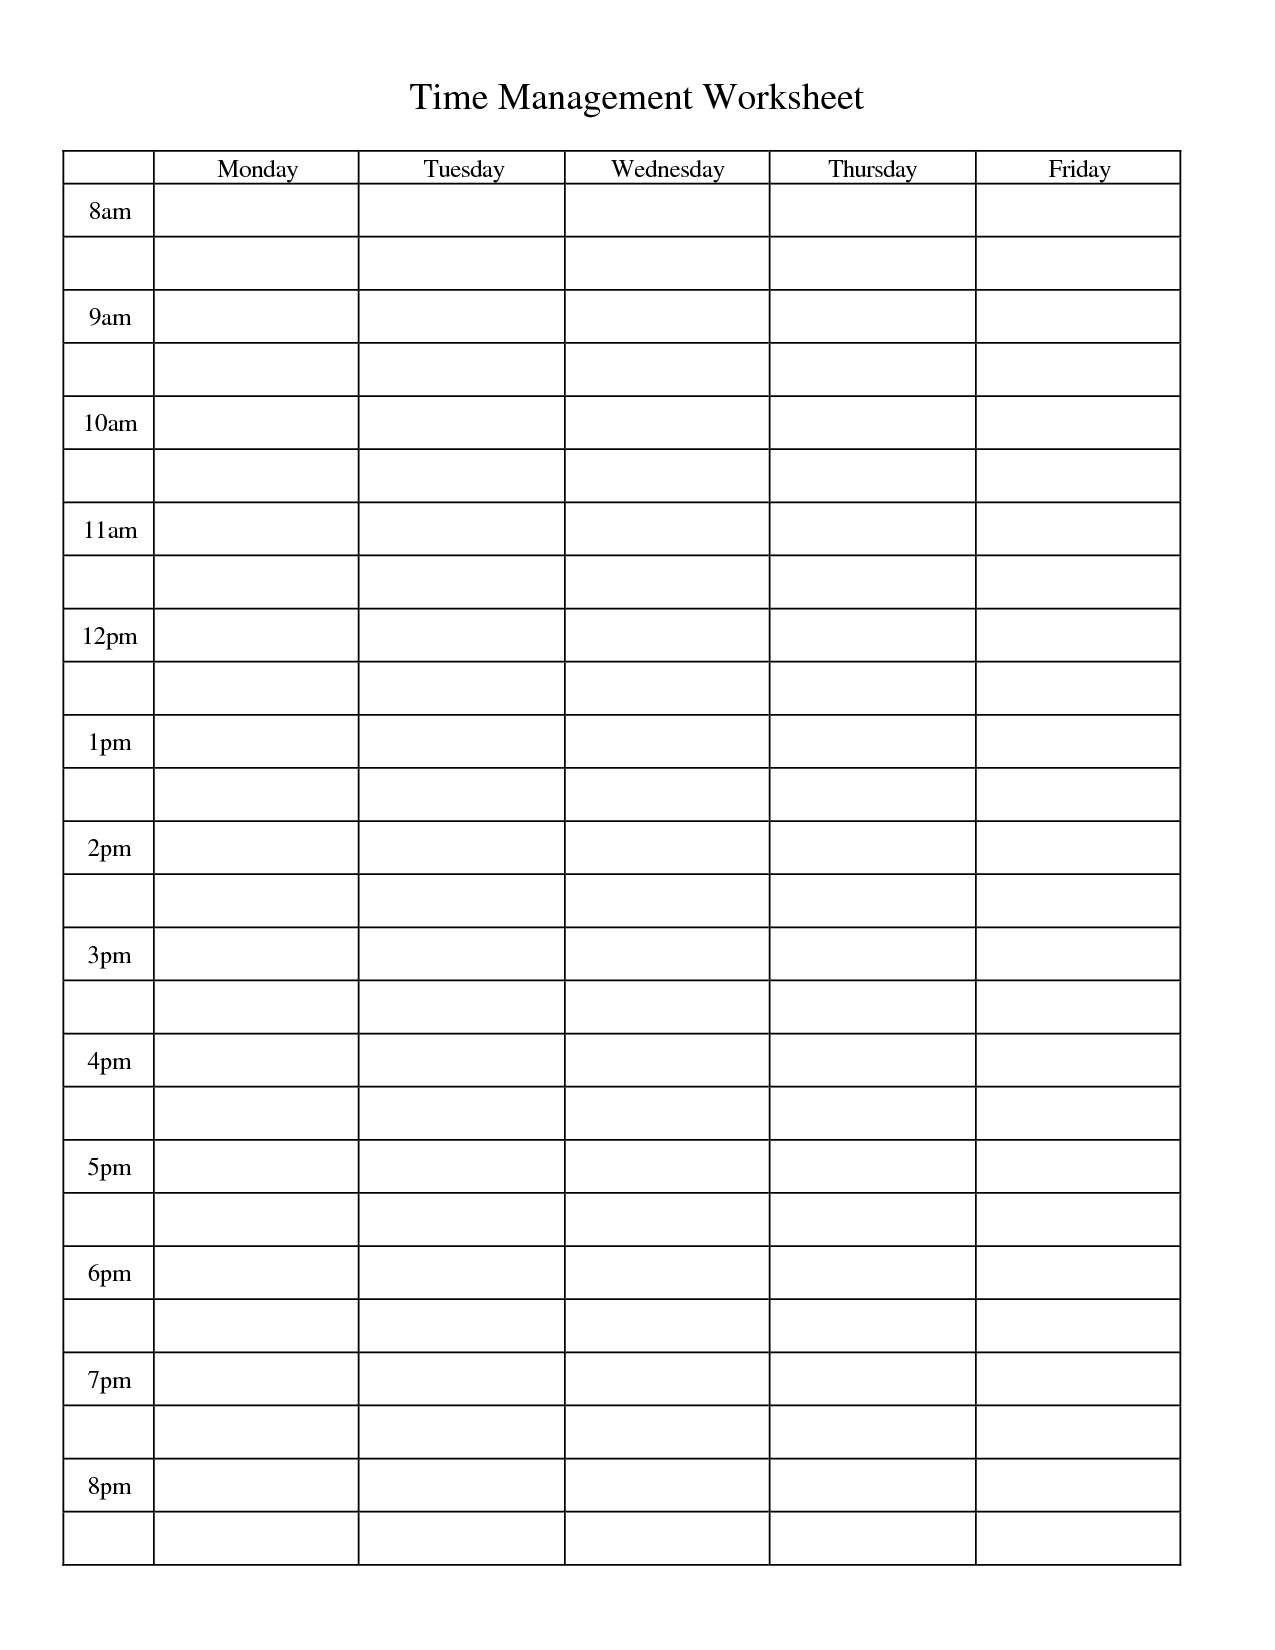 Time Management Worksheet Pdf  Google Search | Time throughout Weekly Calendar With Time Slots Pdf